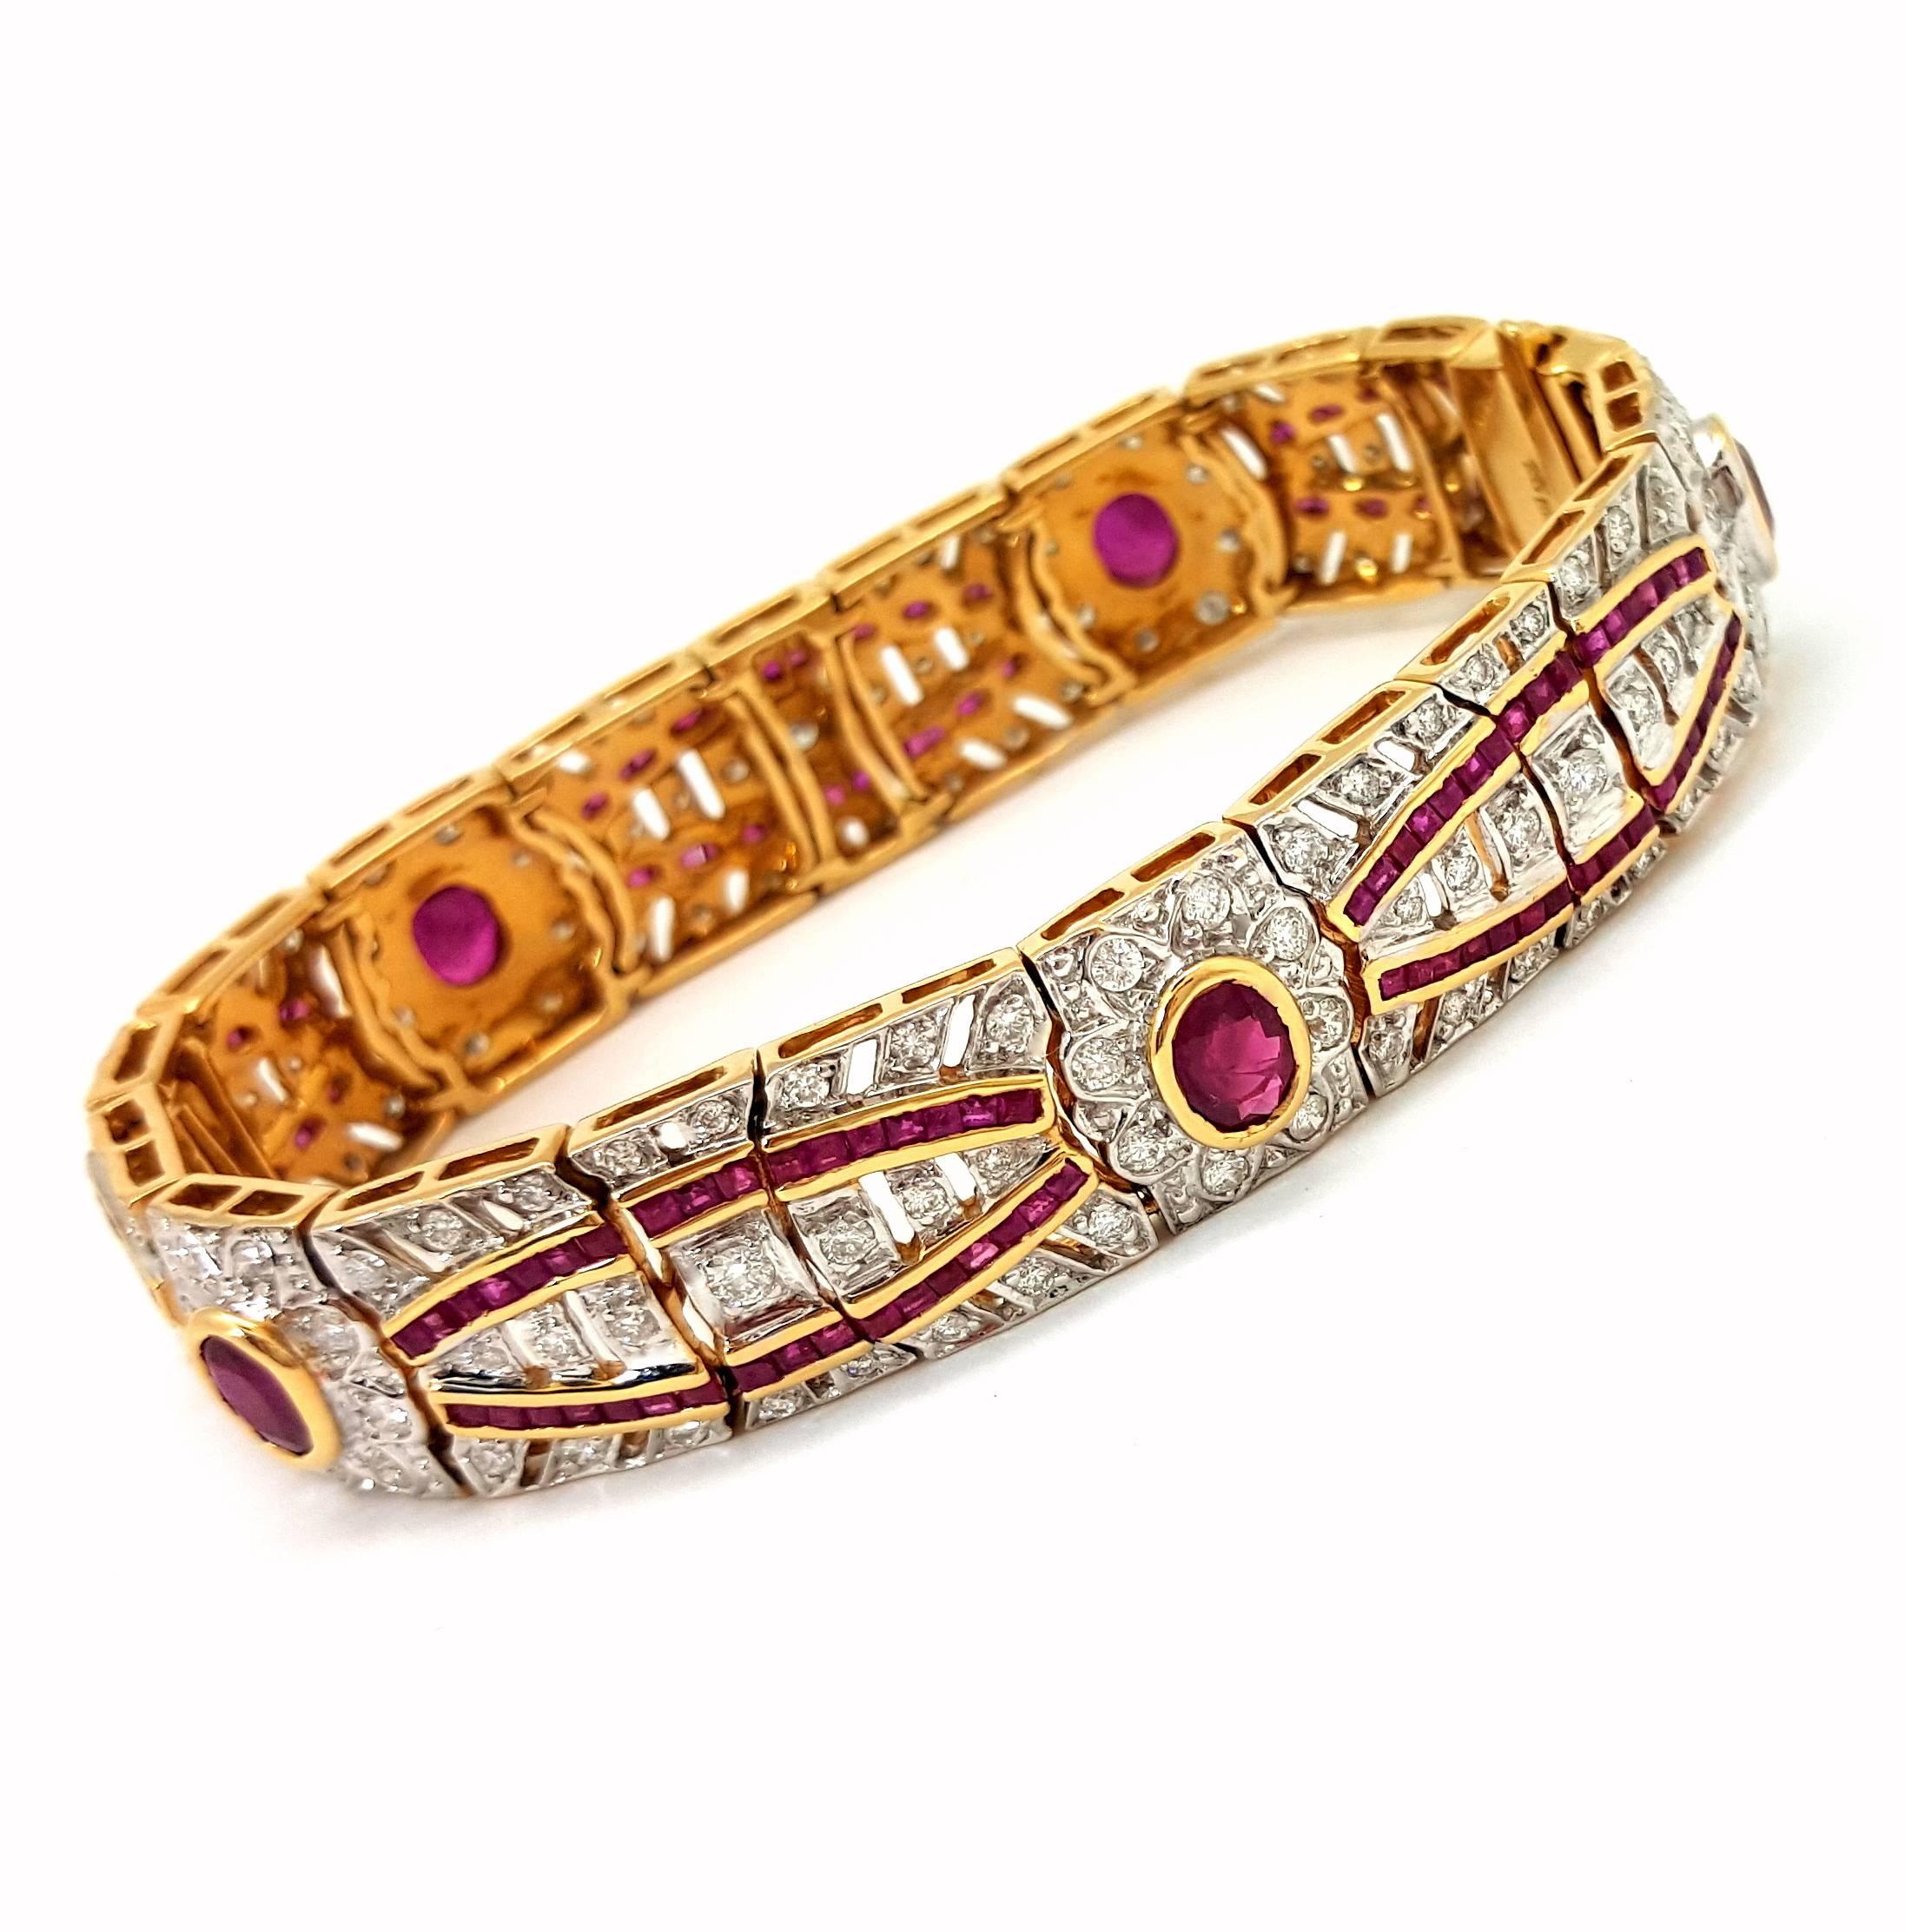 This stunning 18k yellow gold diamond and ruby bracelet is set with 155 round brilliant diamonds. The diamonds are G in color and VS is clarity. There are 172 princess cut rubies that are a pink to a blood-red color. There are five oval rubies that